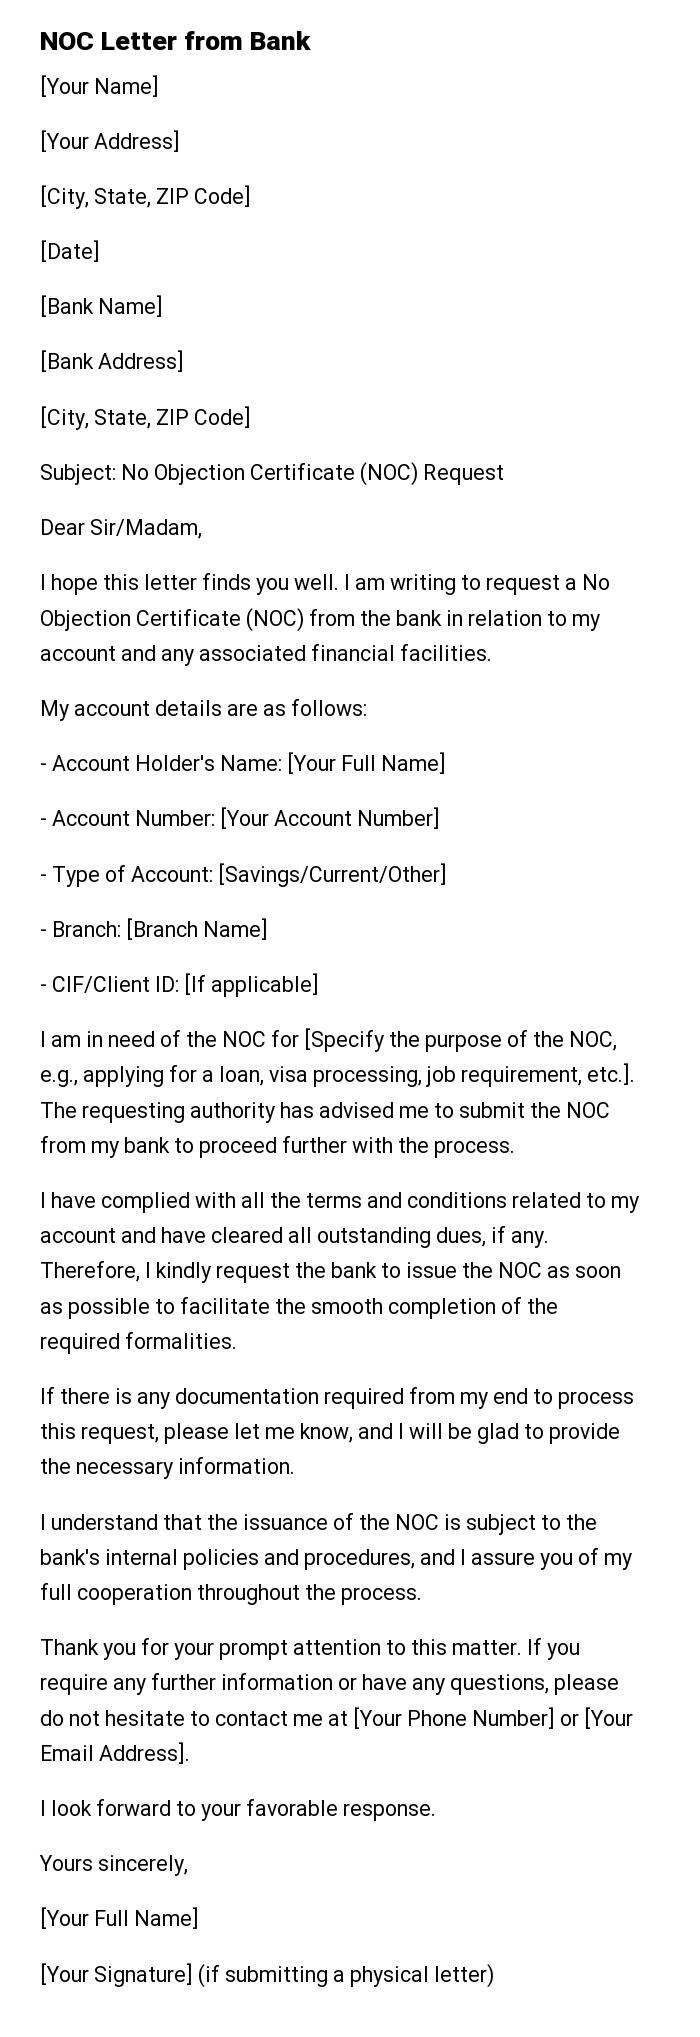 NOC Letter from Bank